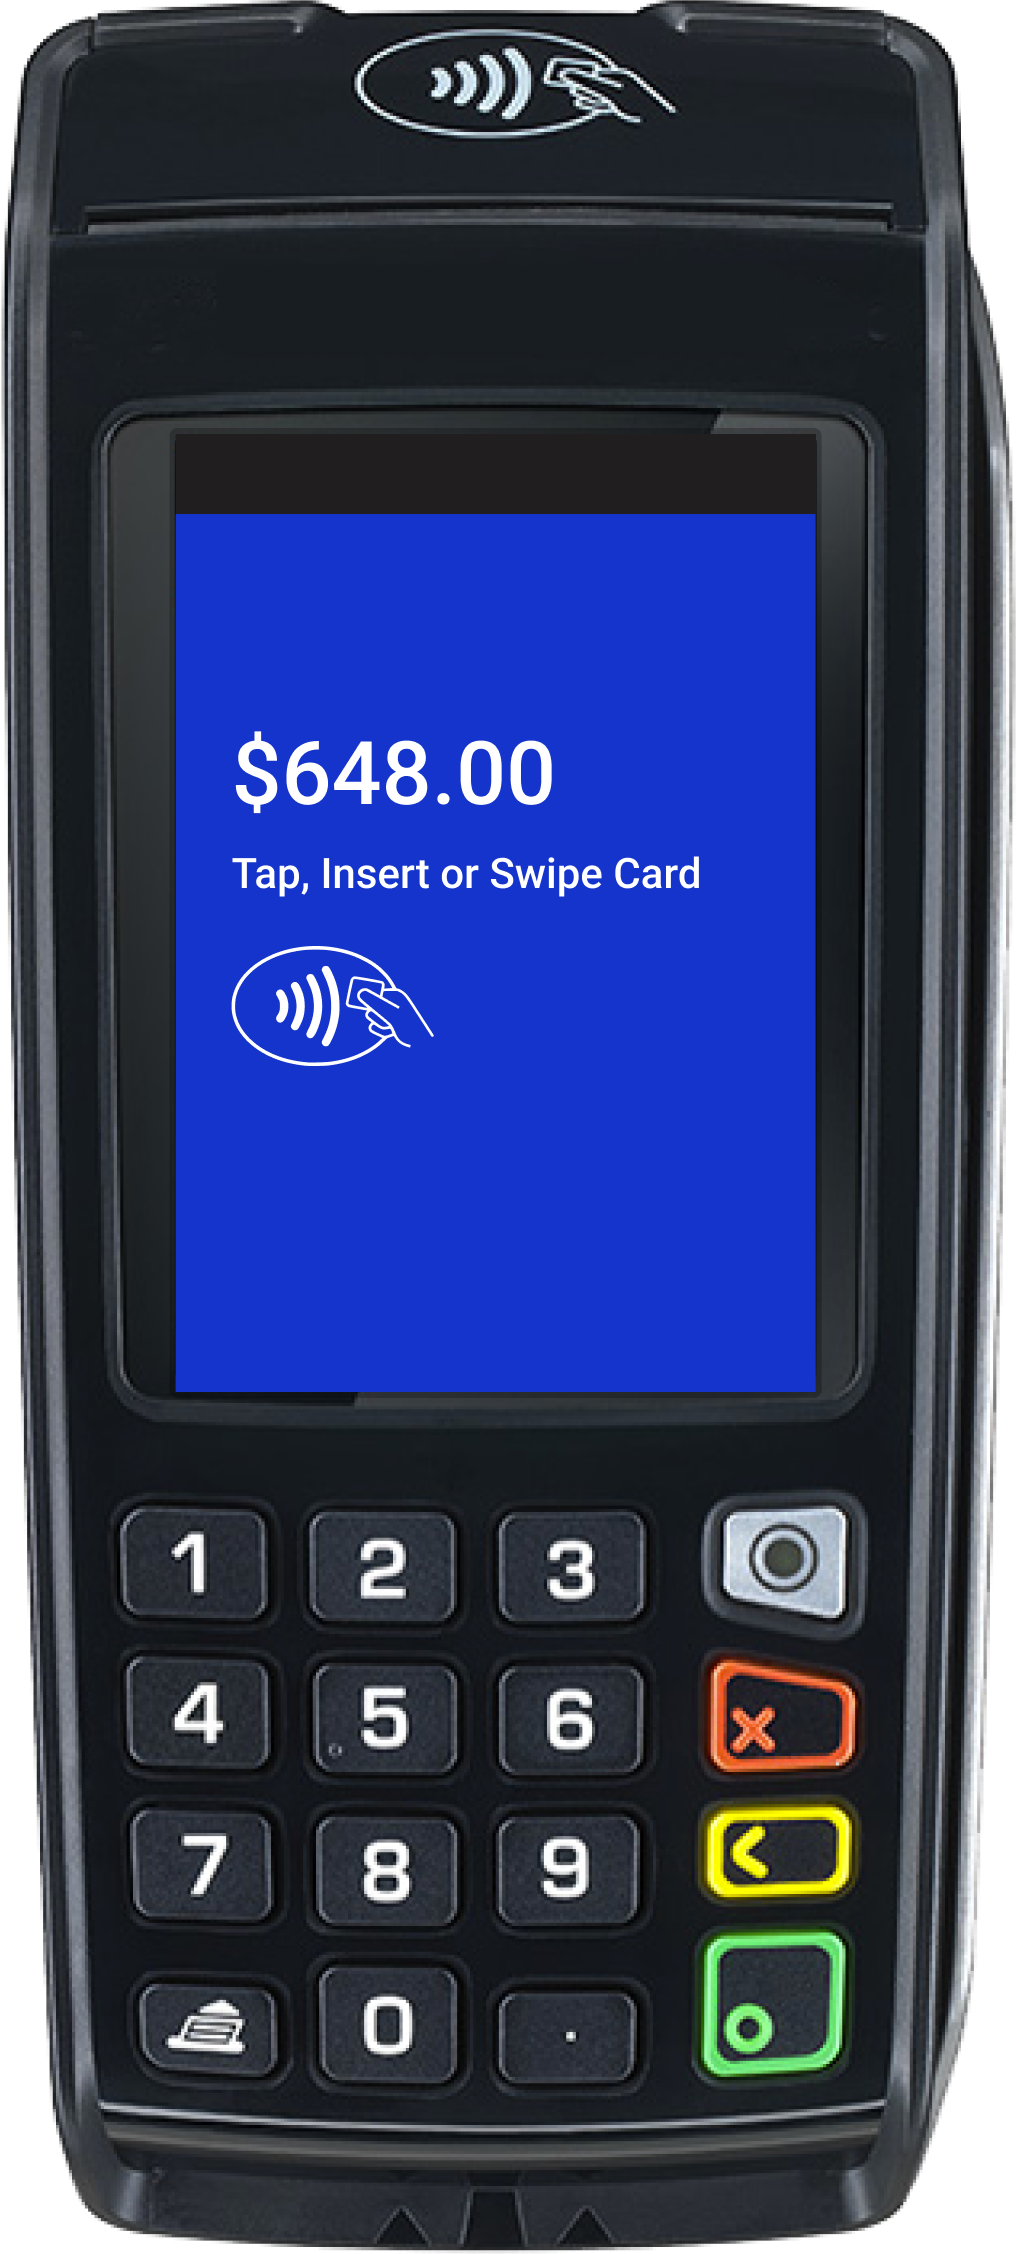 United Kingdom portrait 2 style payment terminal, initiate purchase